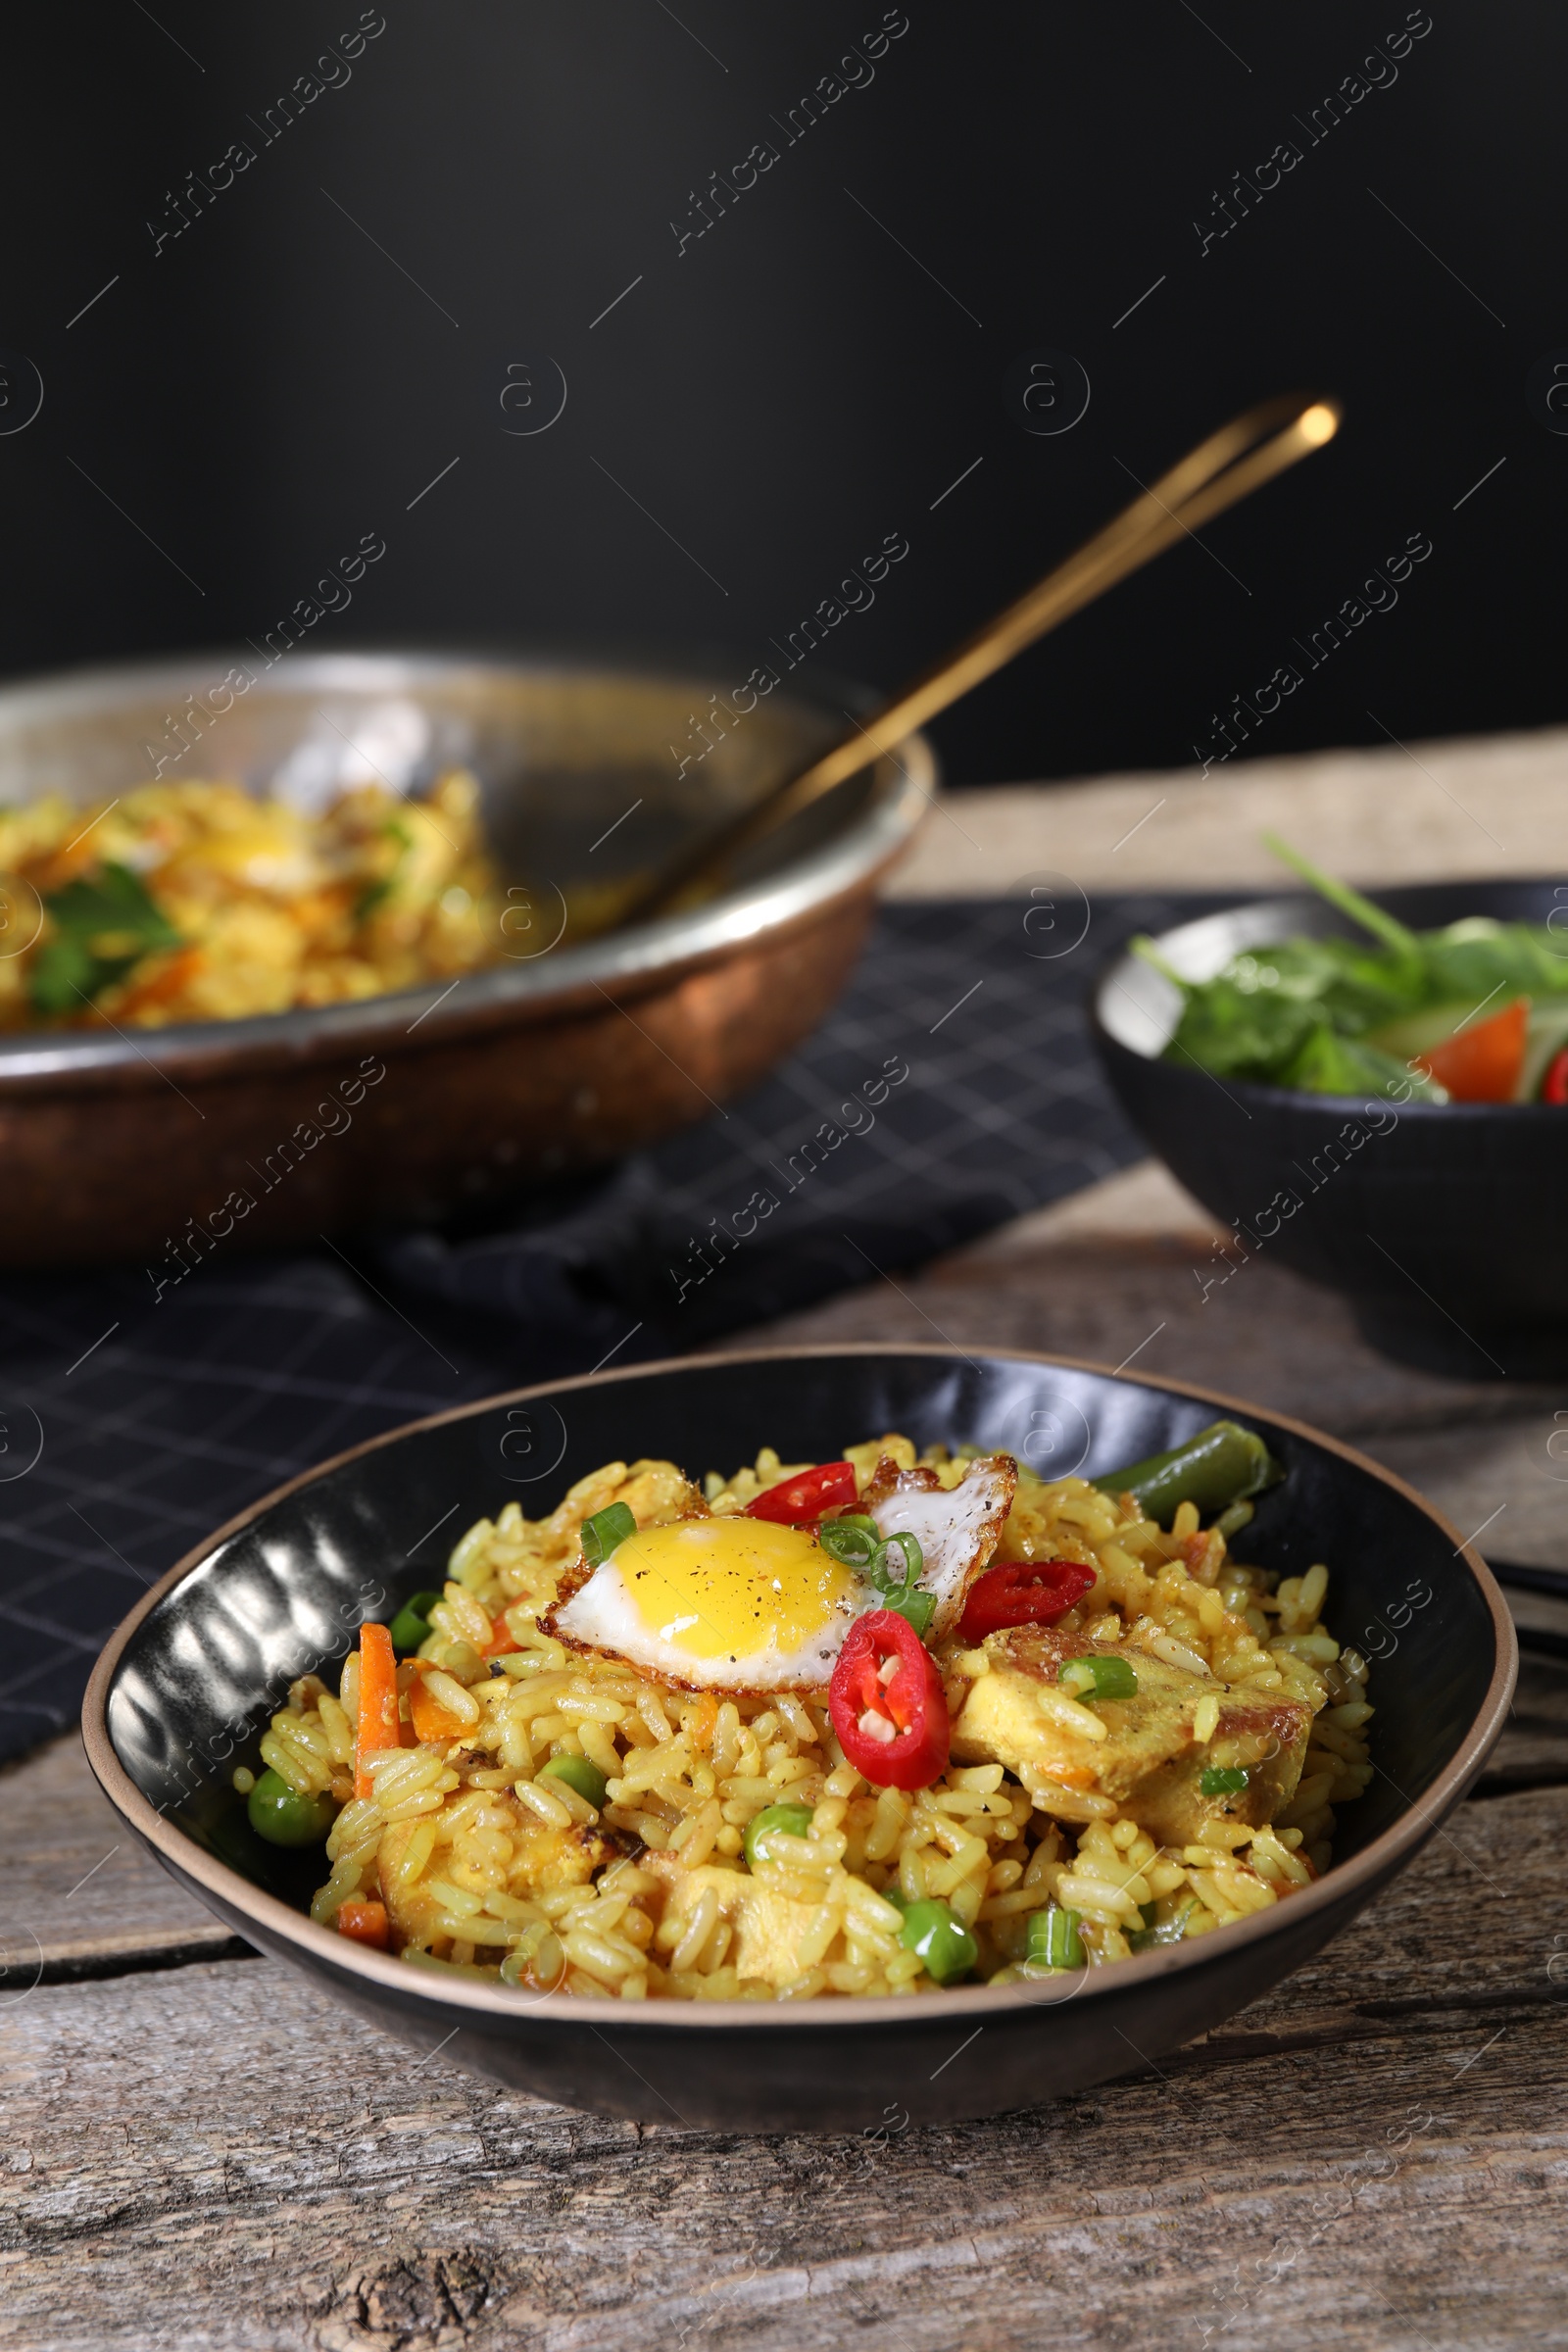 Photo of Tasty rice with meat, egg and vegetables in bowl on wooden table